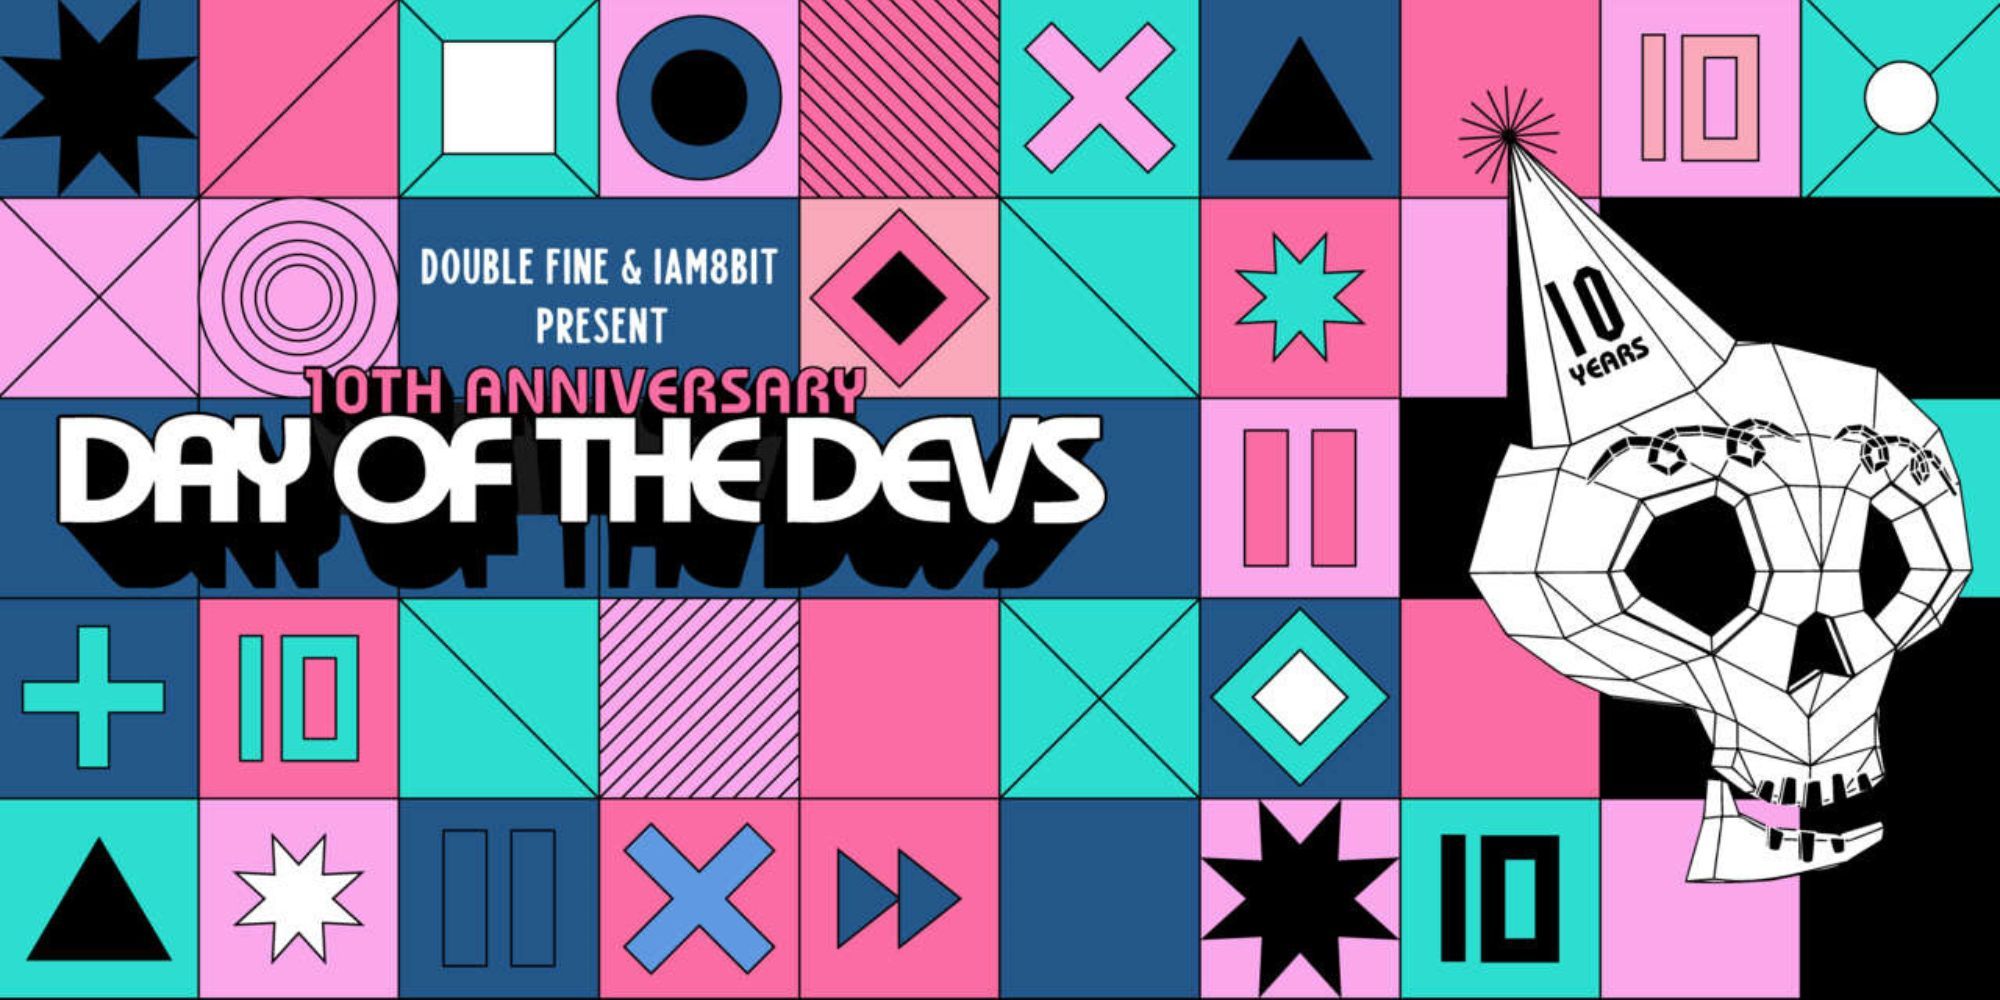 Image shows Day of the Devs 10th anniversary promotional art.